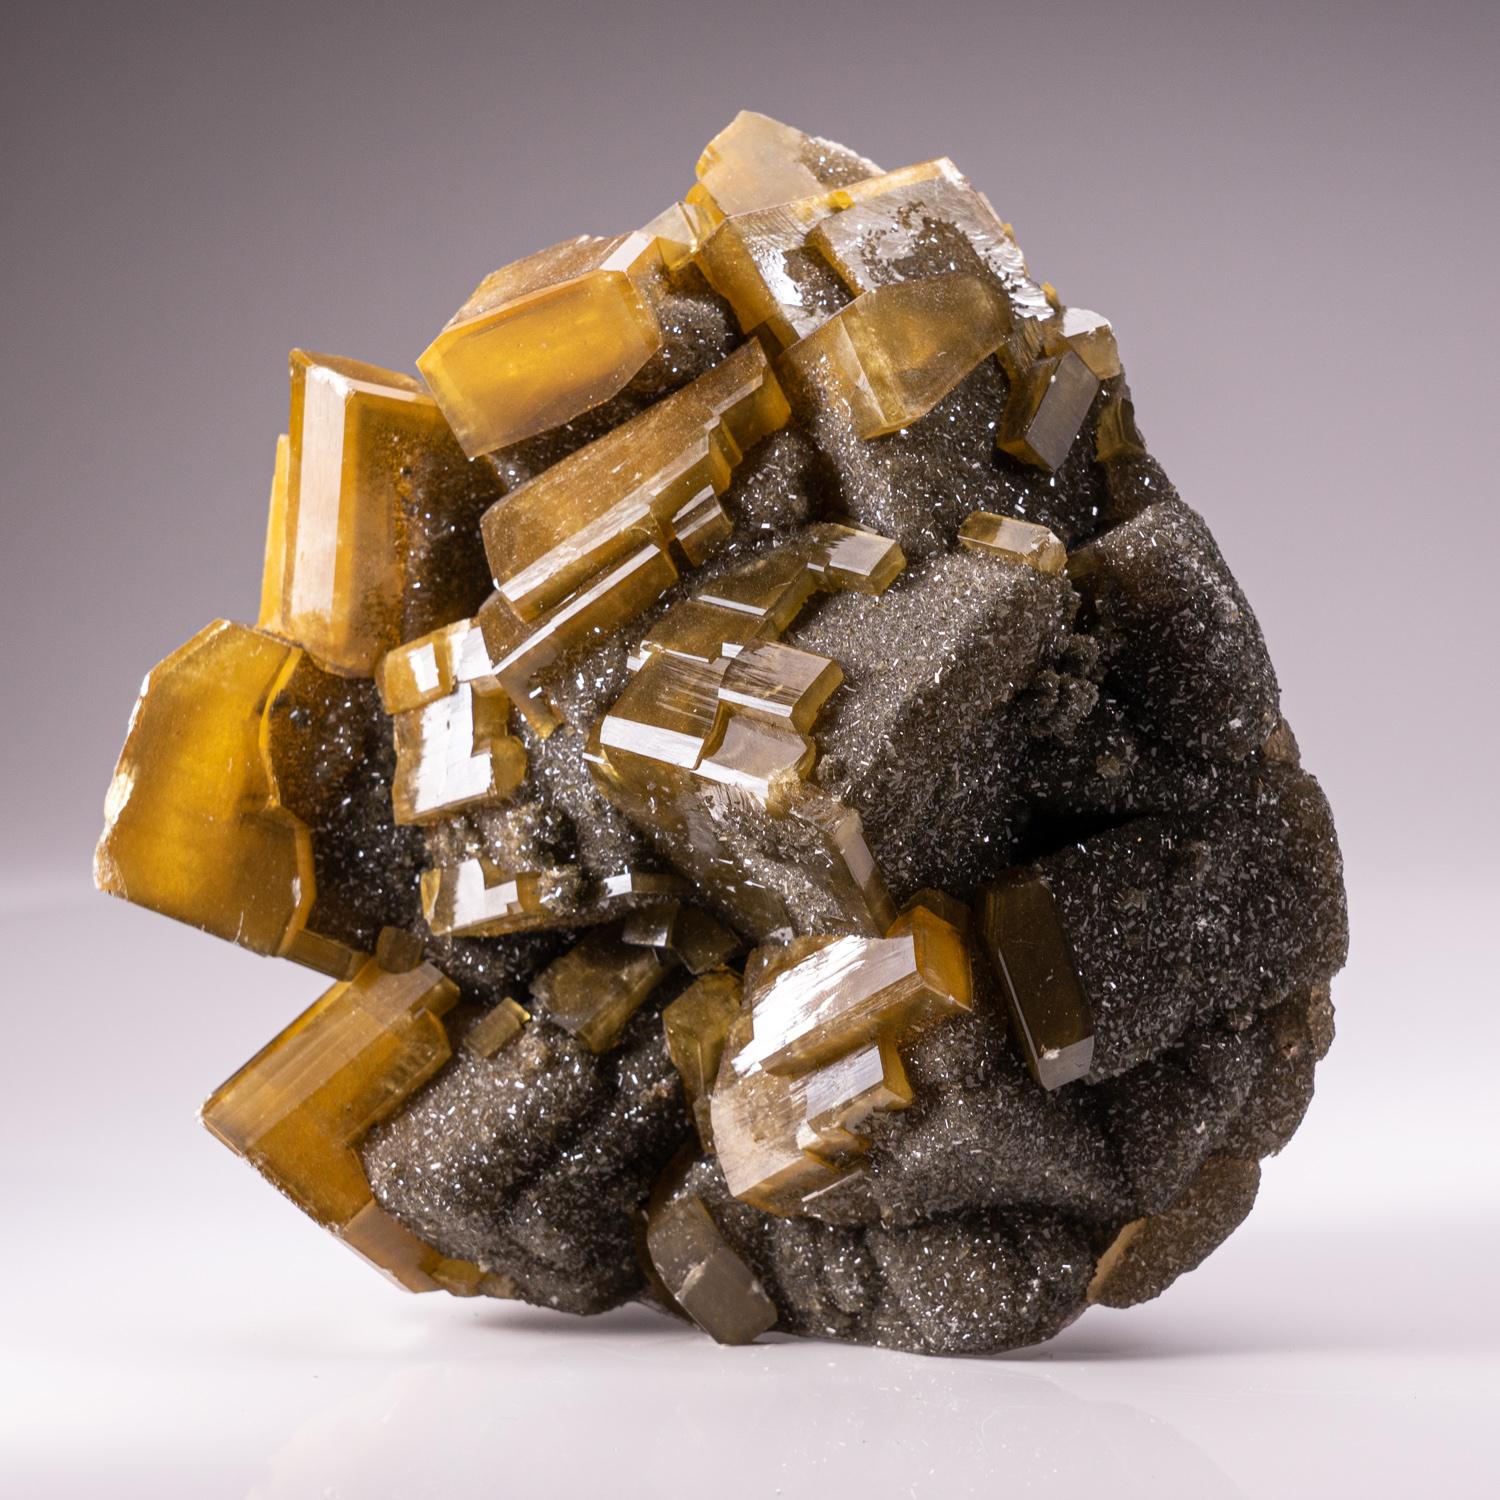 Golden Barite with Marcasite Crystals from Nandan County, Hechi, Guangxi, China.

Complex intersecting formation of lustrous gem translucent golden barite crystals with lustrous faces and sharp modified rhombic faces.

Weight: 6.8 lbs,